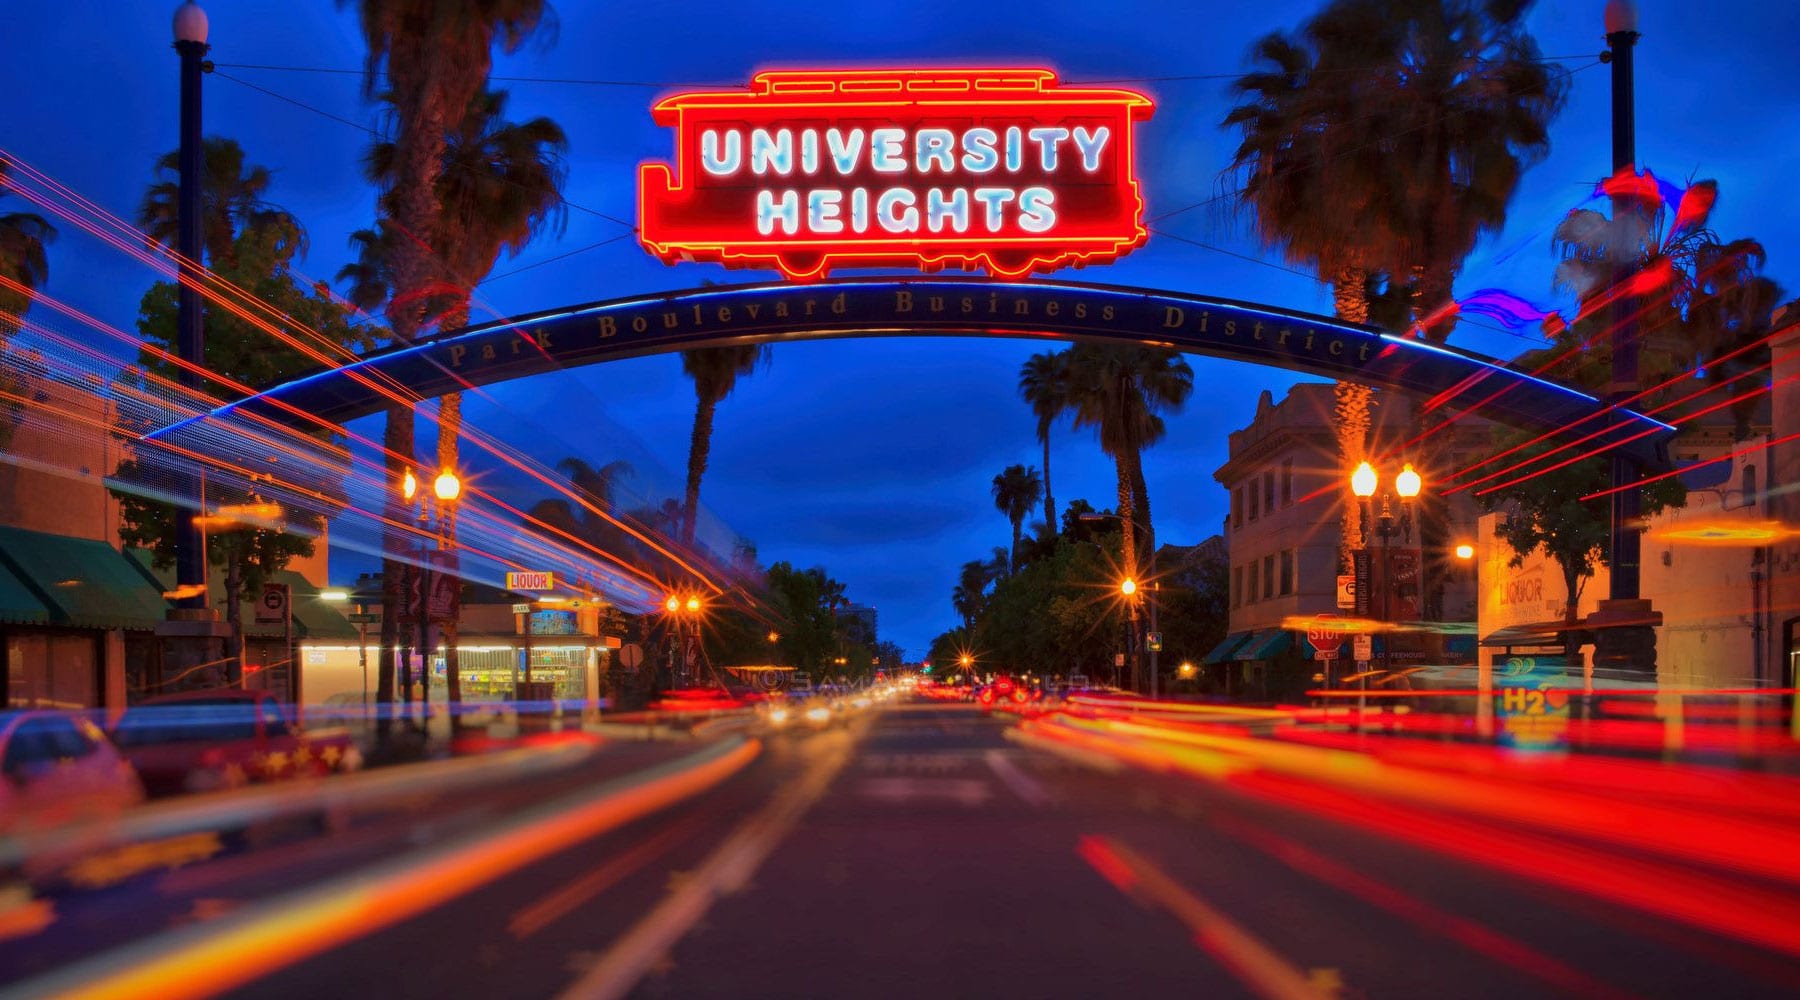 A Foodie Guide to University Heights